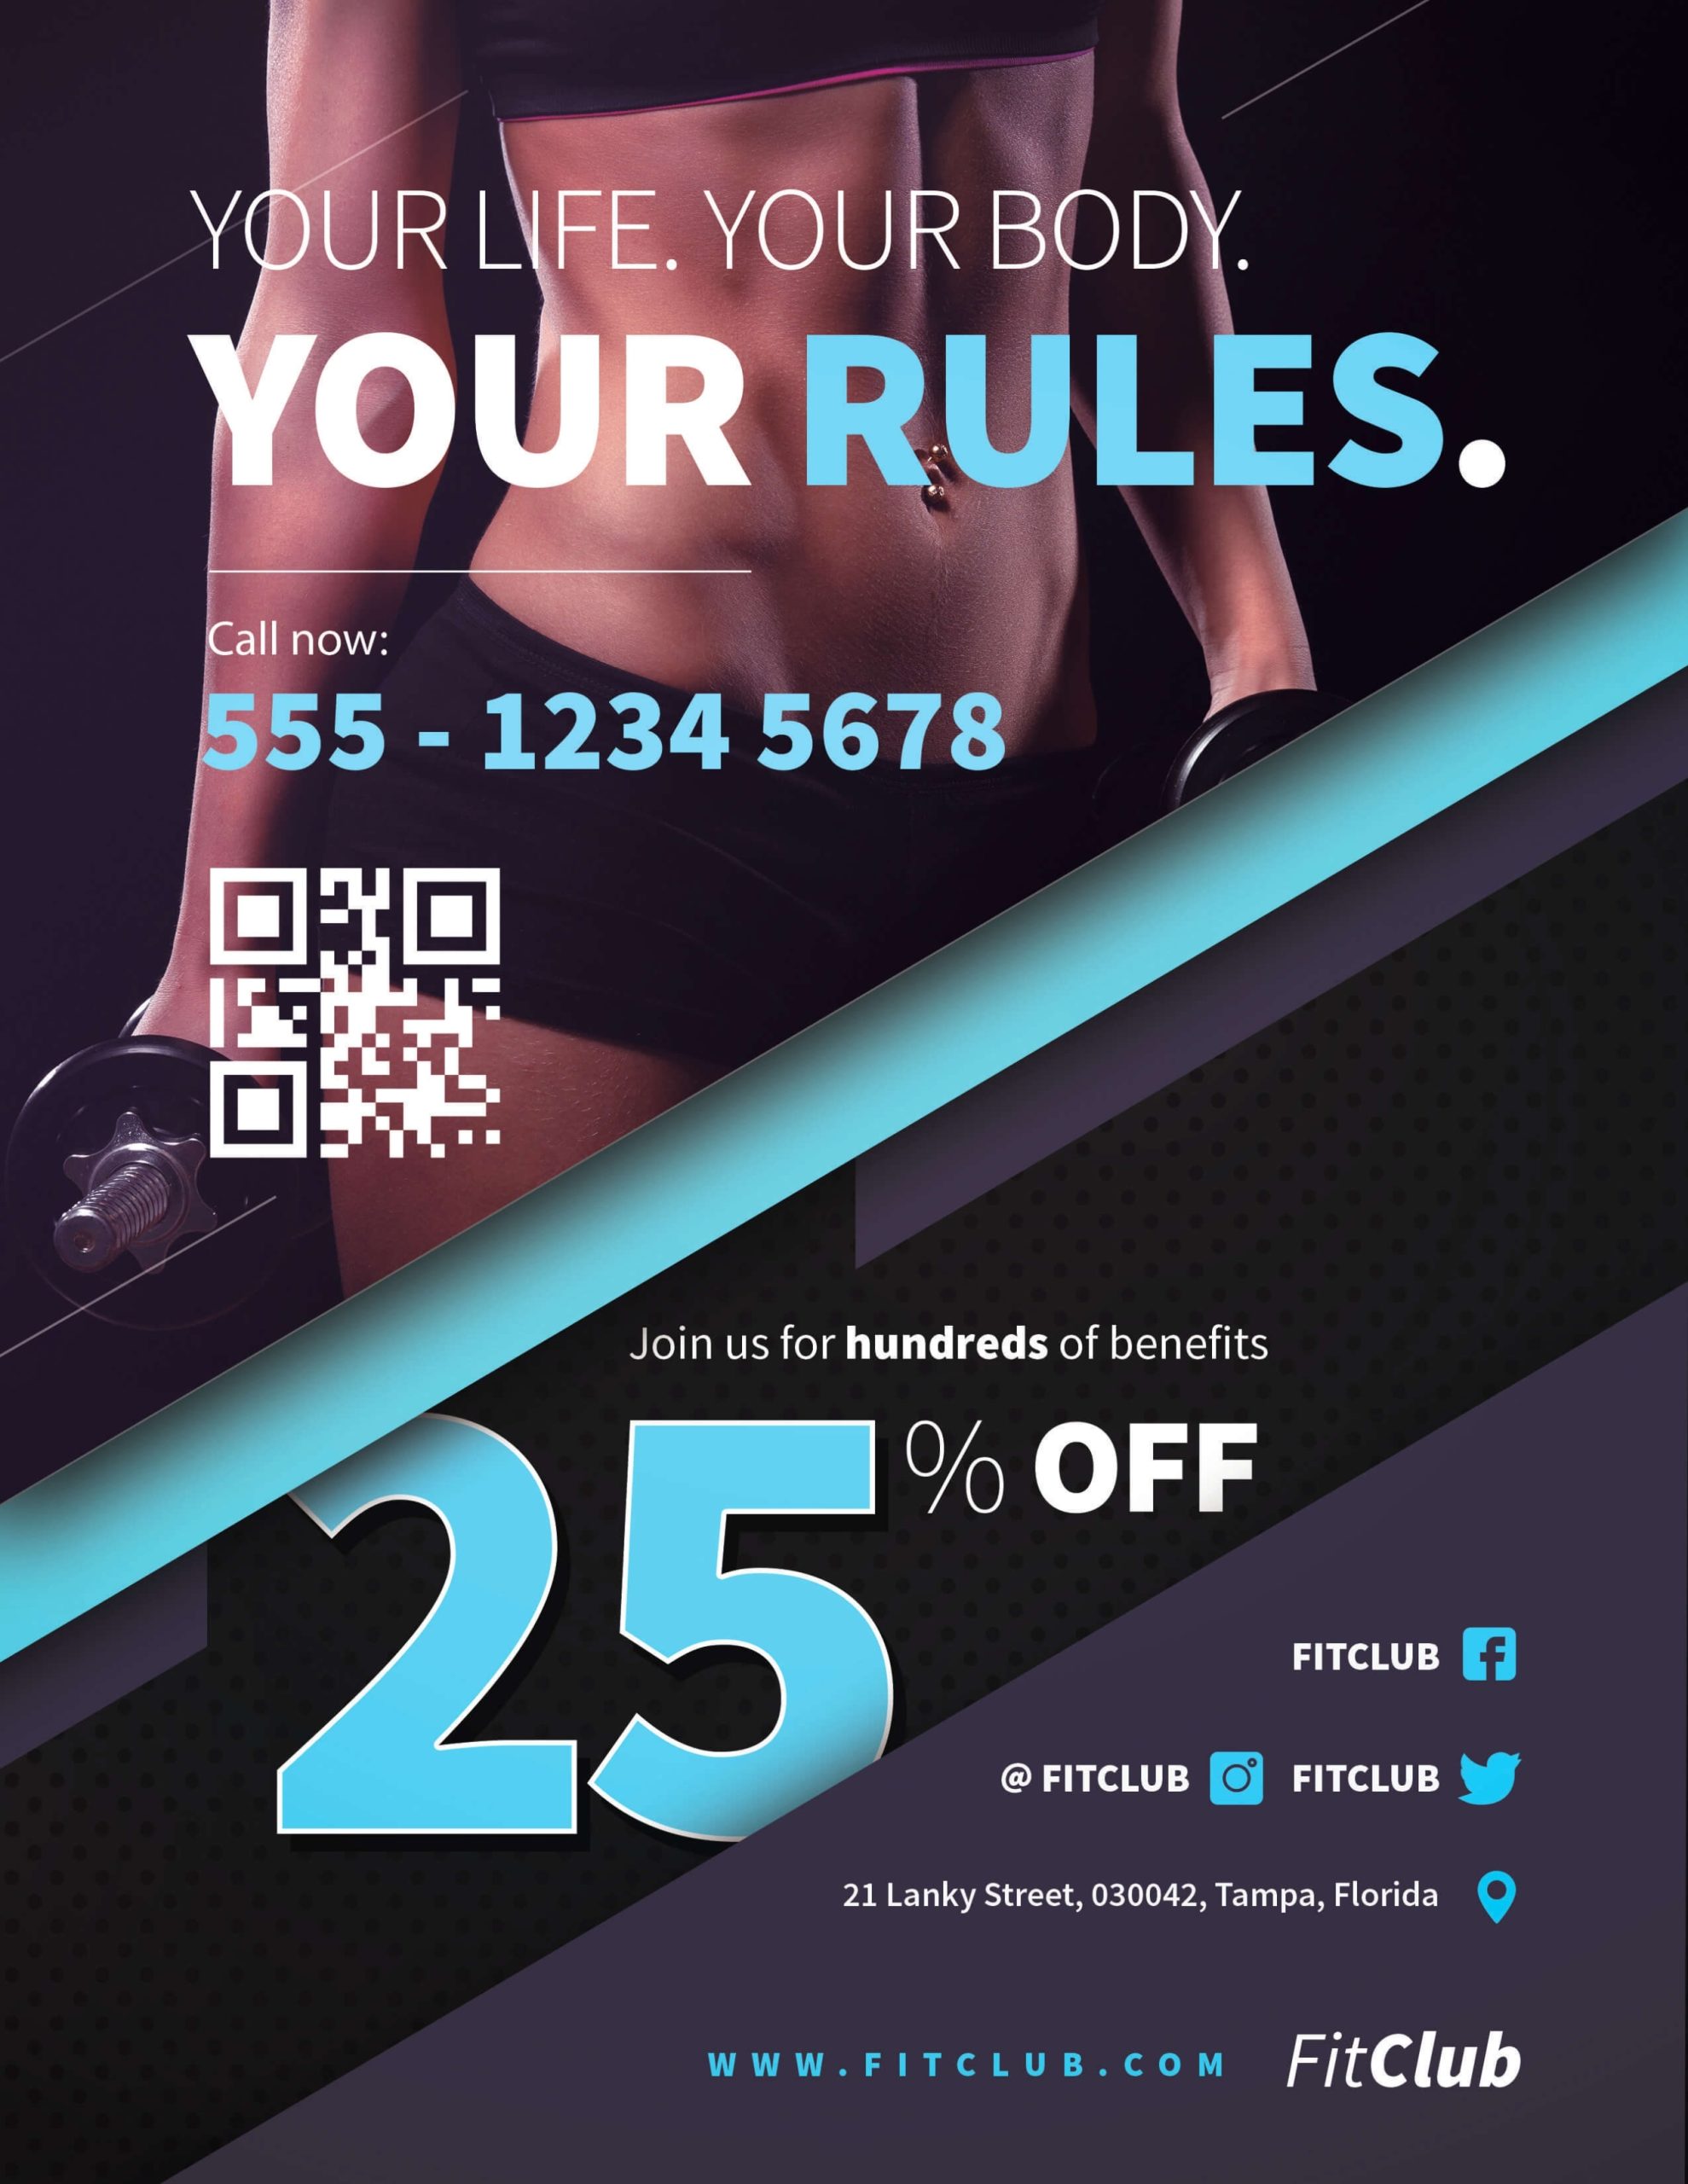 Fitness Flyer Psd Template | Lifeinsys Intended For Html Flyer Templates